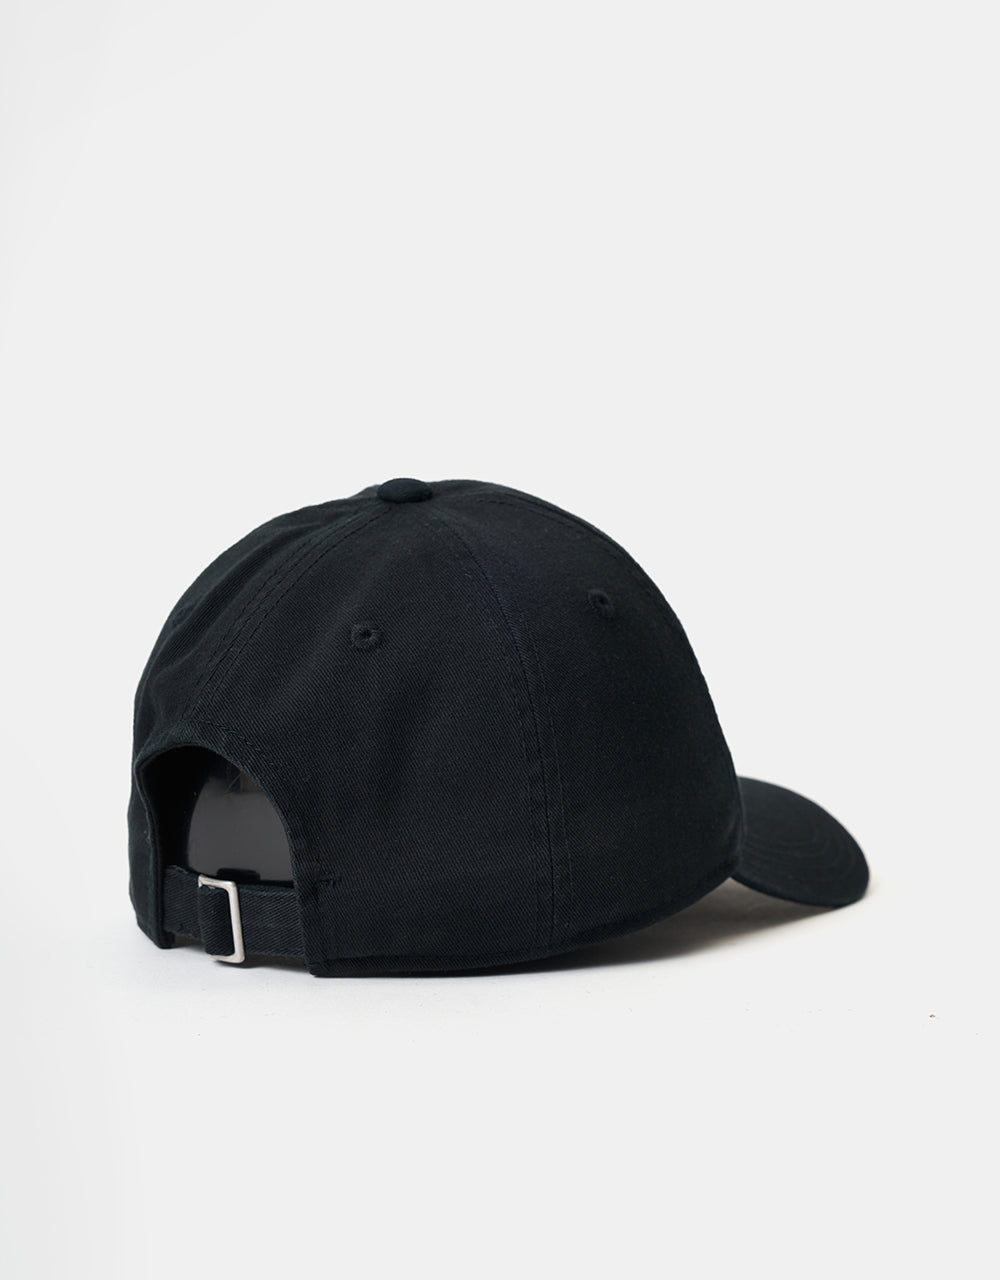 Route One You Wouldn't Dad Cap-Black